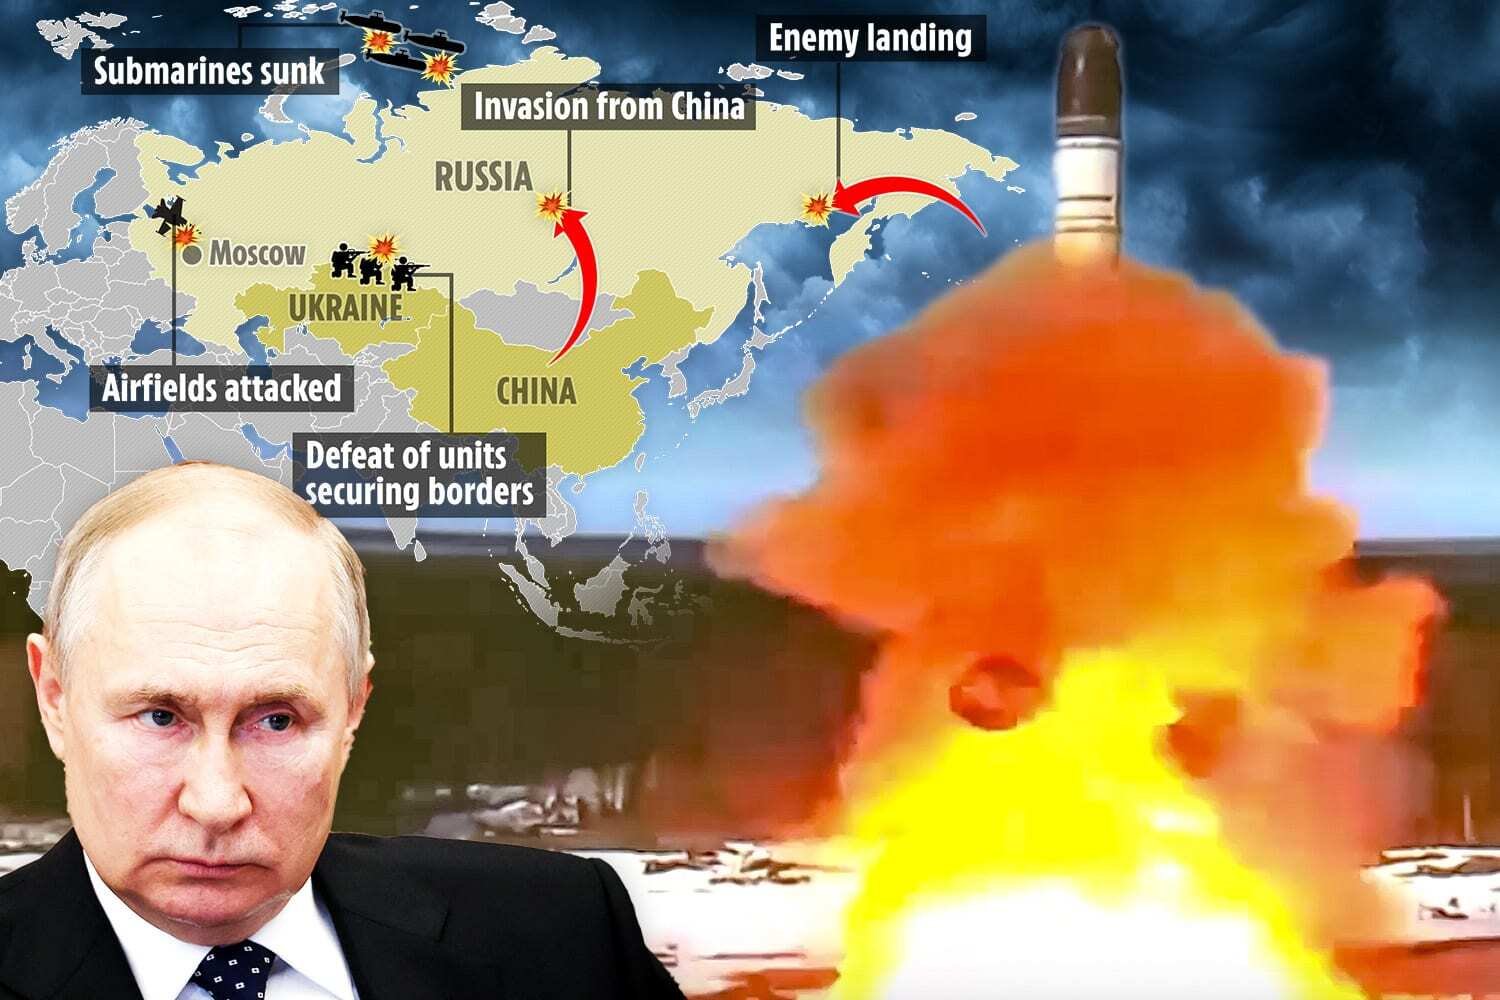 Trigger happy Putin closer to firing nuke than EVER feared as bombshell docs reveal nuclear strike invasion plans